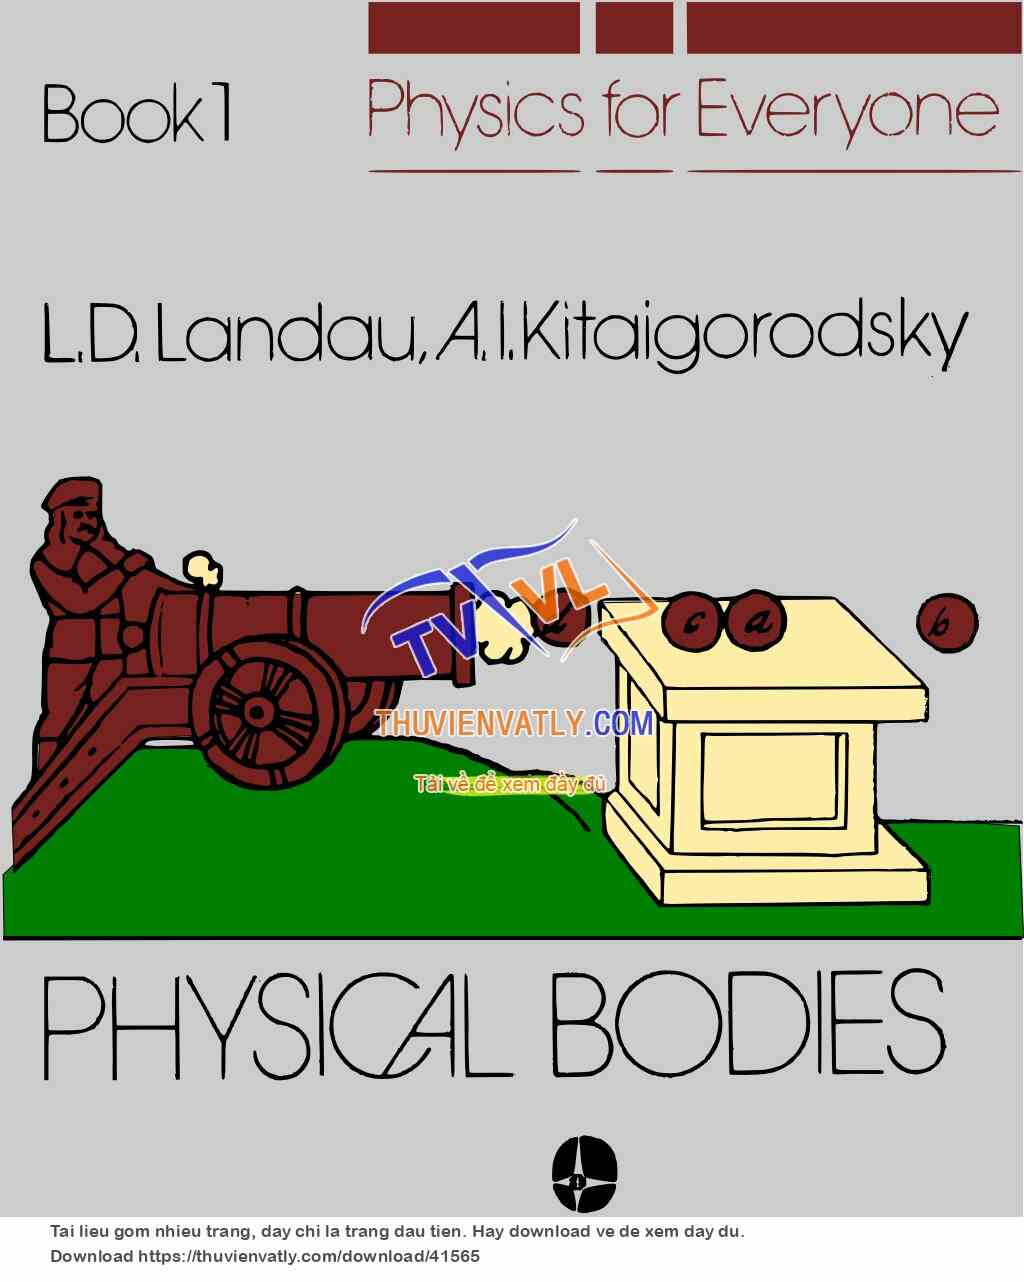 Physics for Everyone - Book 1 - Physical Bodies